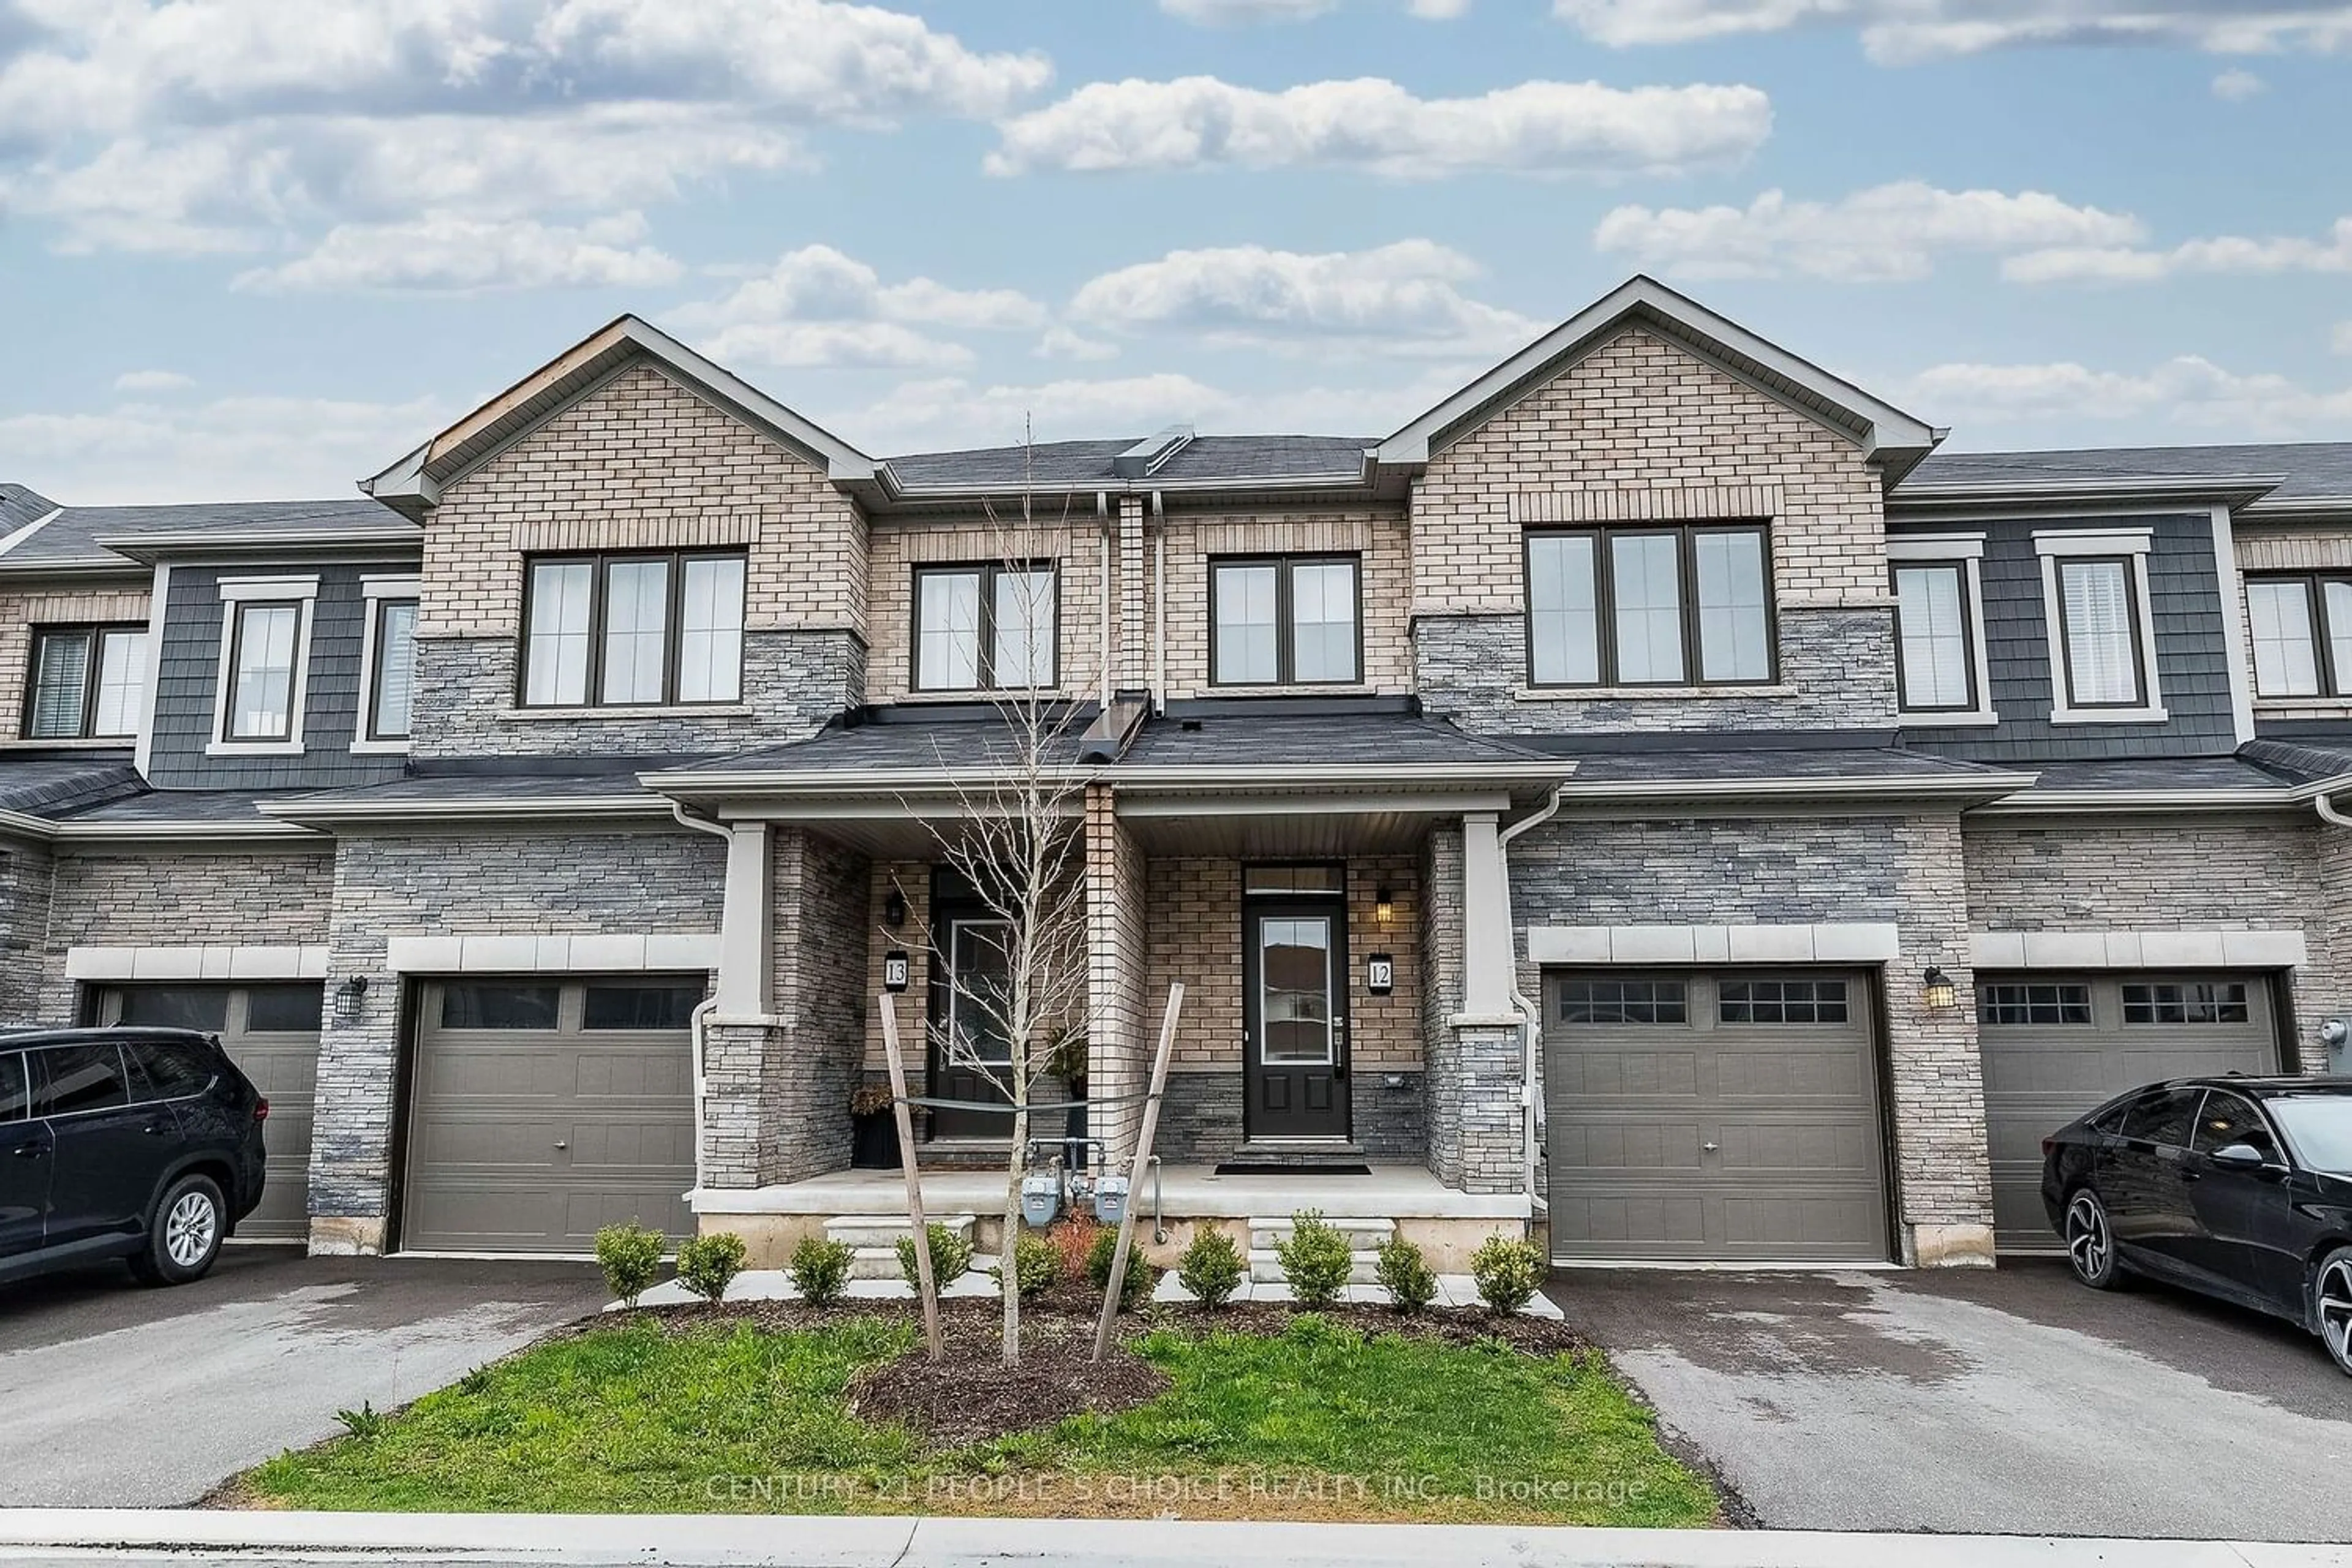 Home with brick exterior material for 8273 Tulip Tree Dr #12, Niagara Falls Ontario L2H 3S8